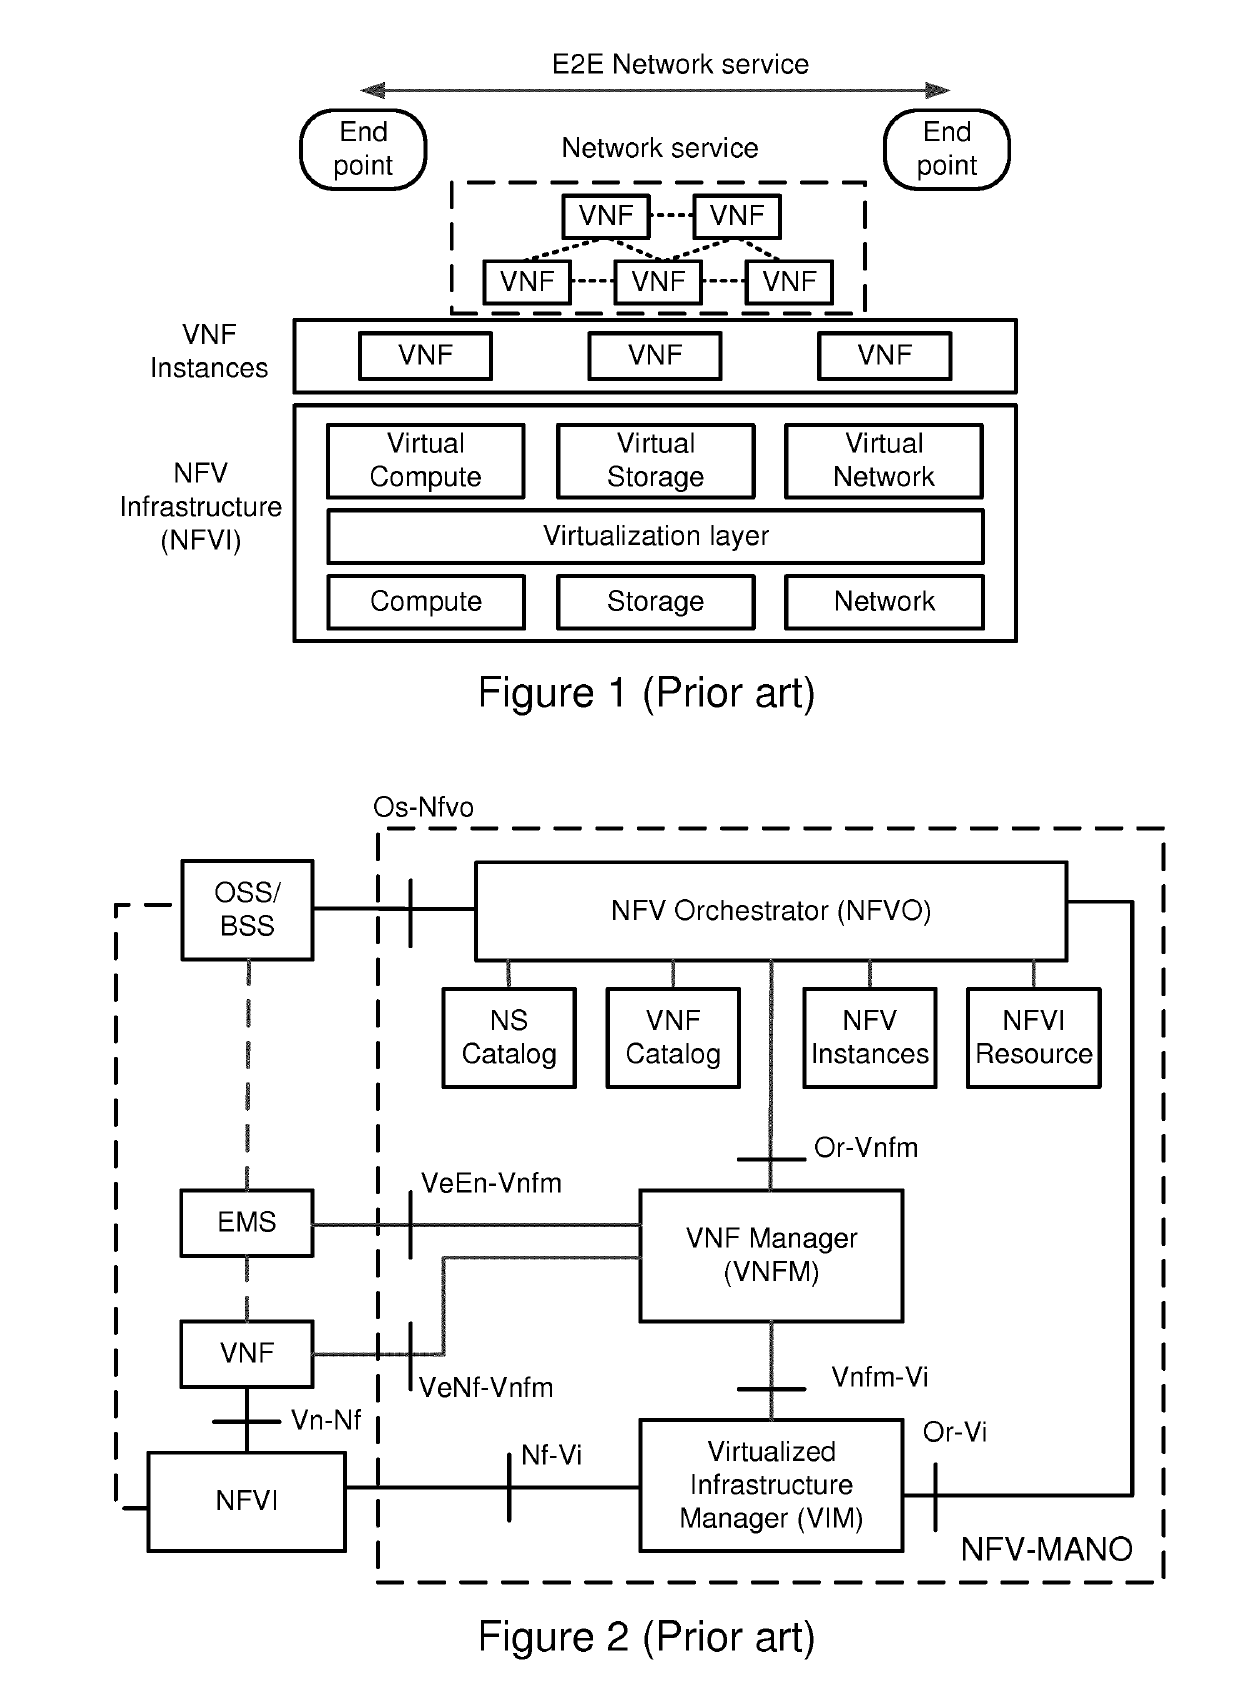 Method and arrangement for configuring a secure domain in a network functions virtualization infrastructure